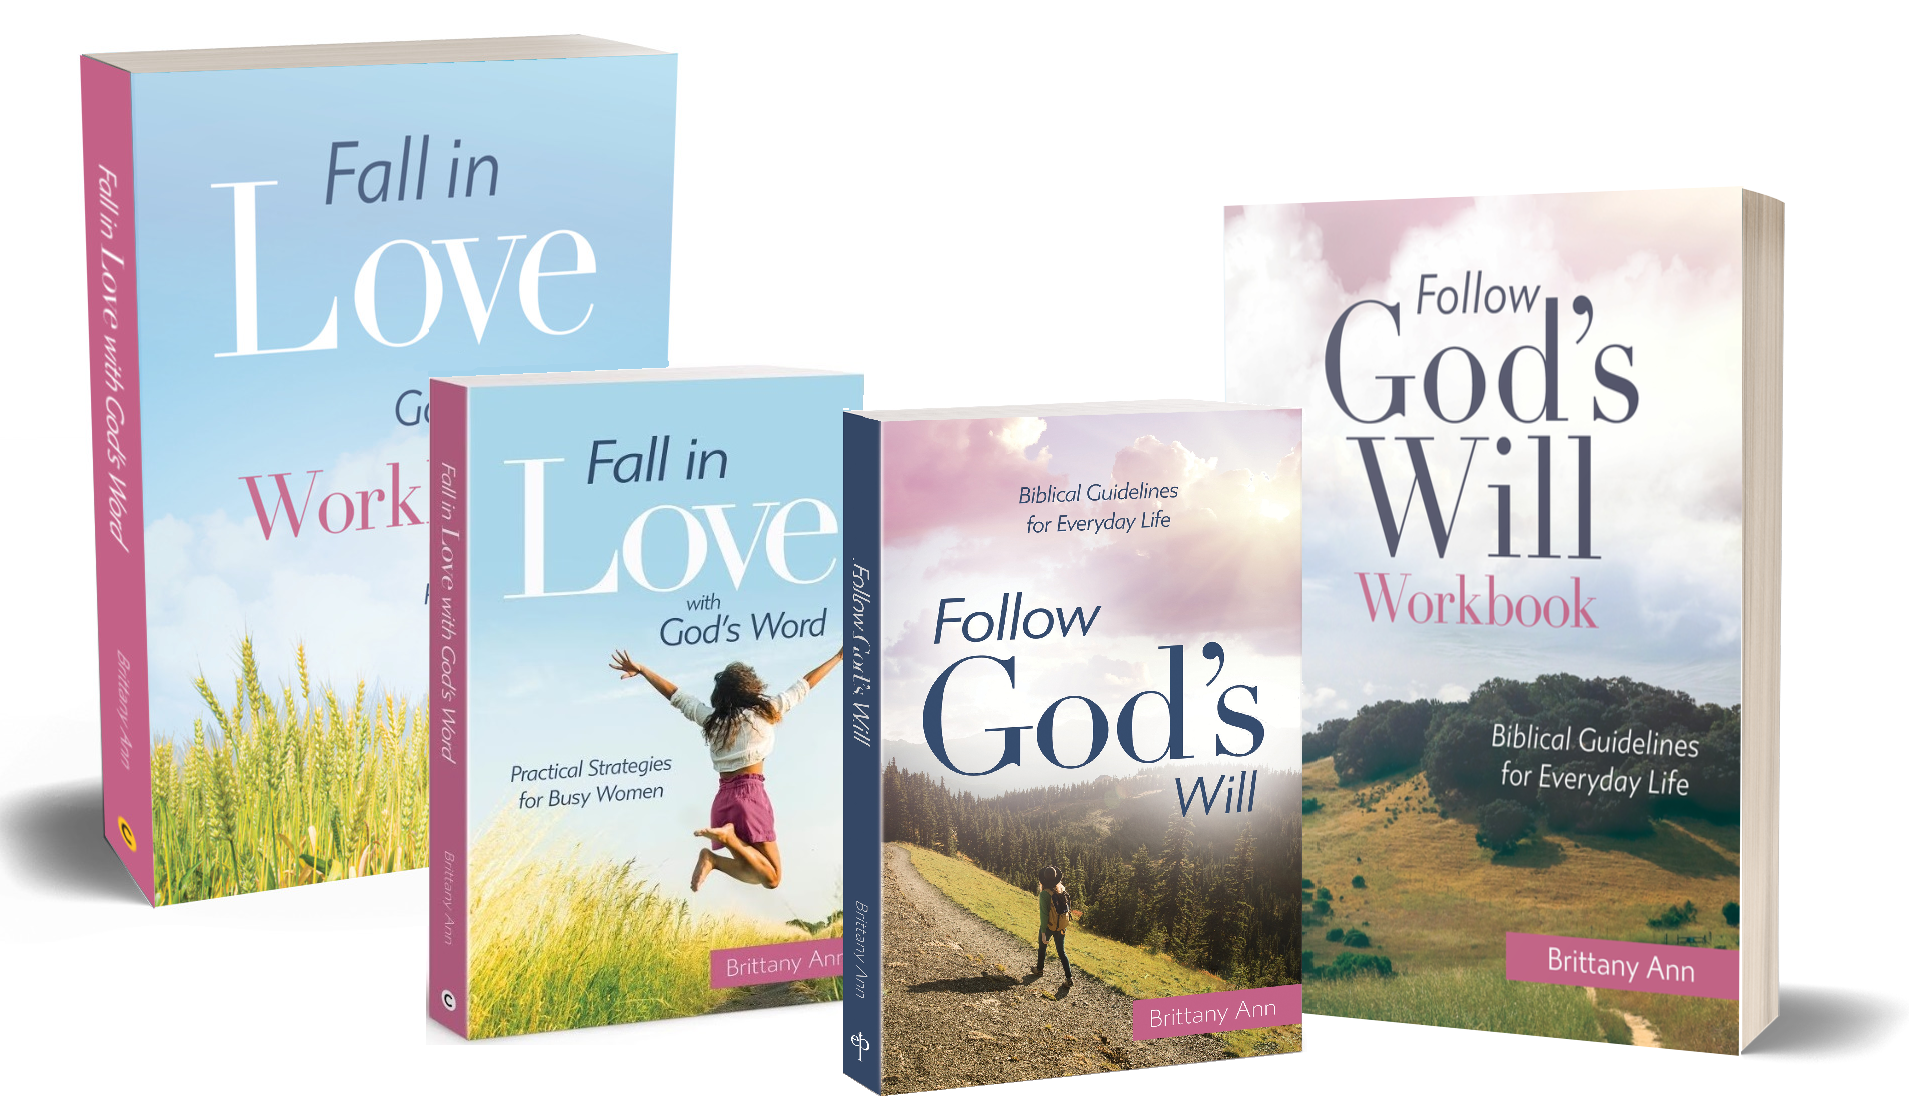 Fall in Love with God's Word and Follow God's Will Sets